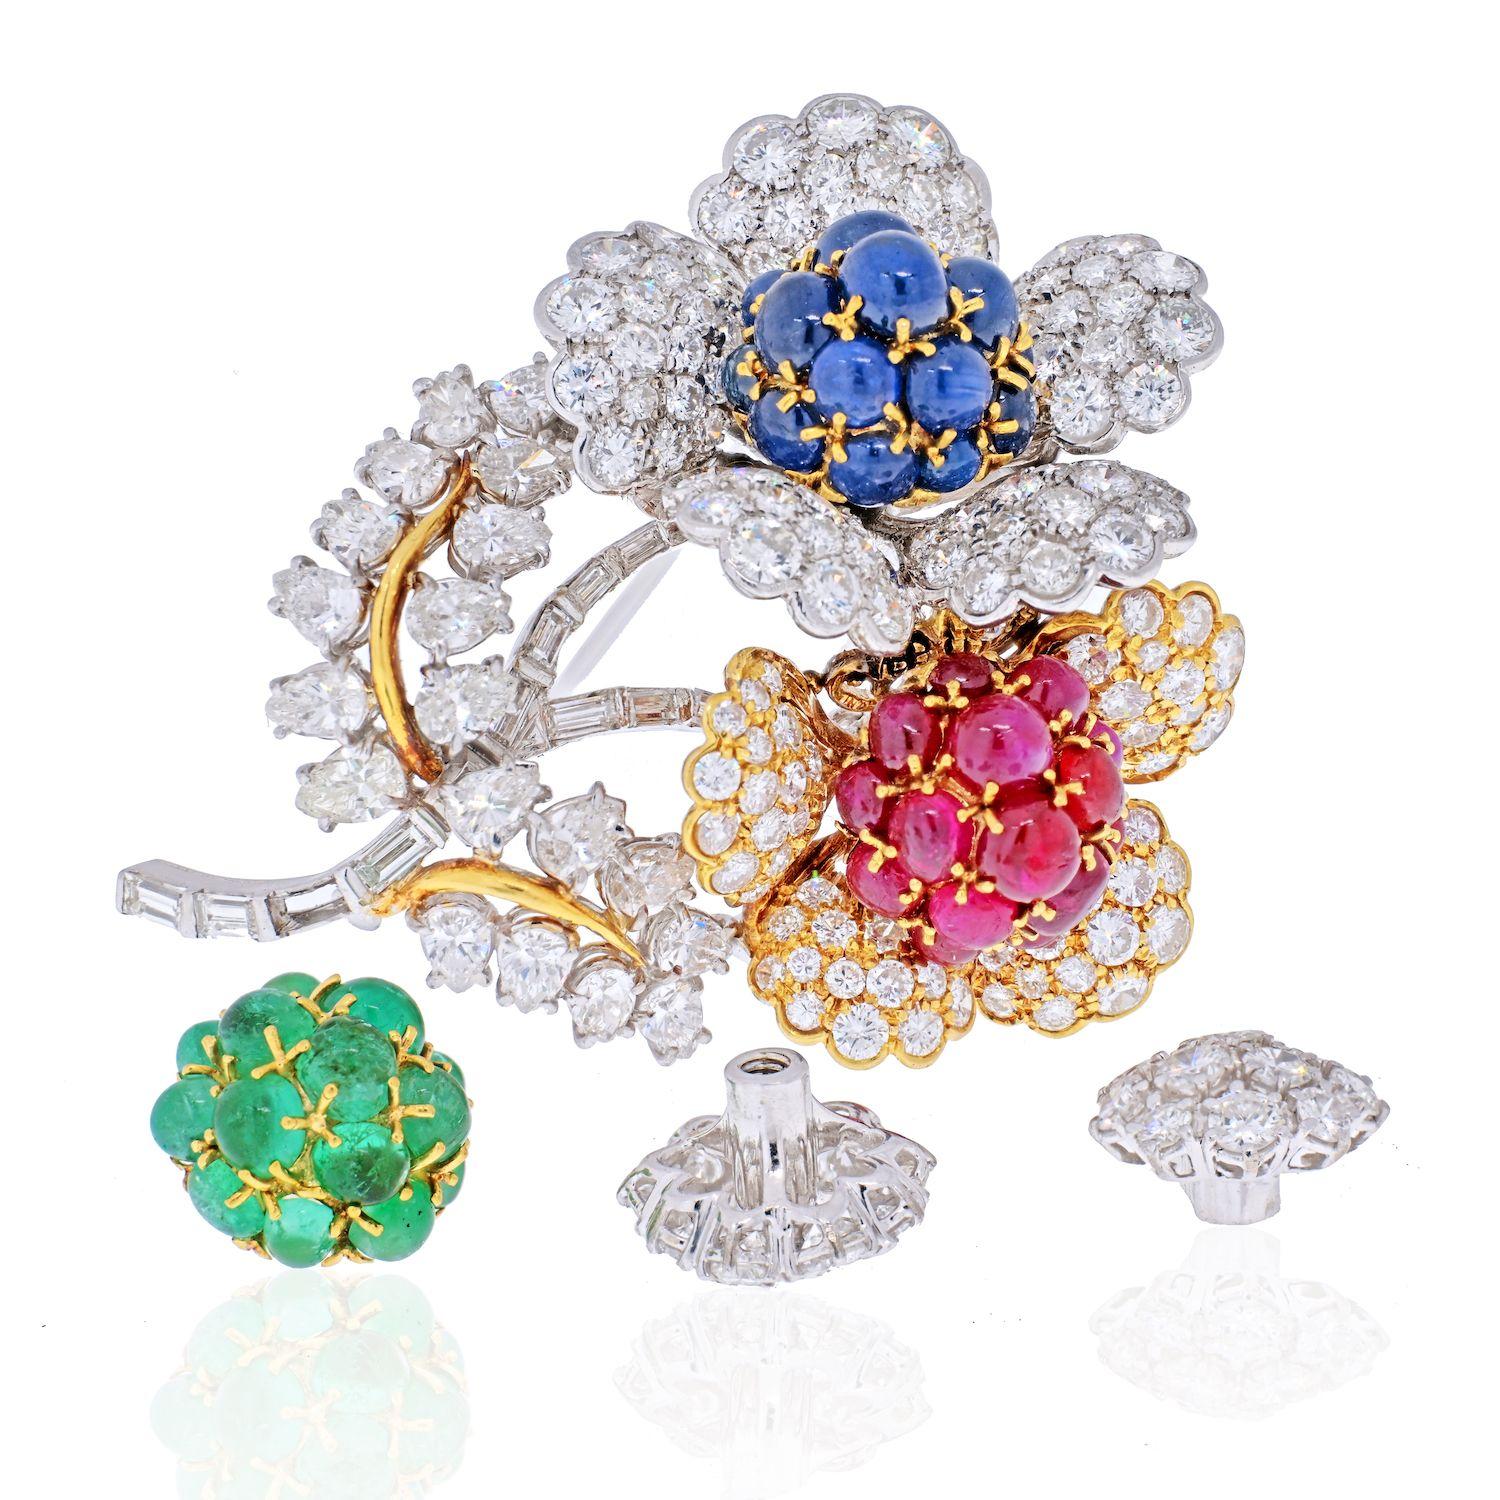 This magnificanet brooch consists of two diamond flowers one in platinum and one in yellow gold. So sparkly and so vibrant you would not want to take it off. Best of all the inside blossom parts are interchangeable and can be swapped for other